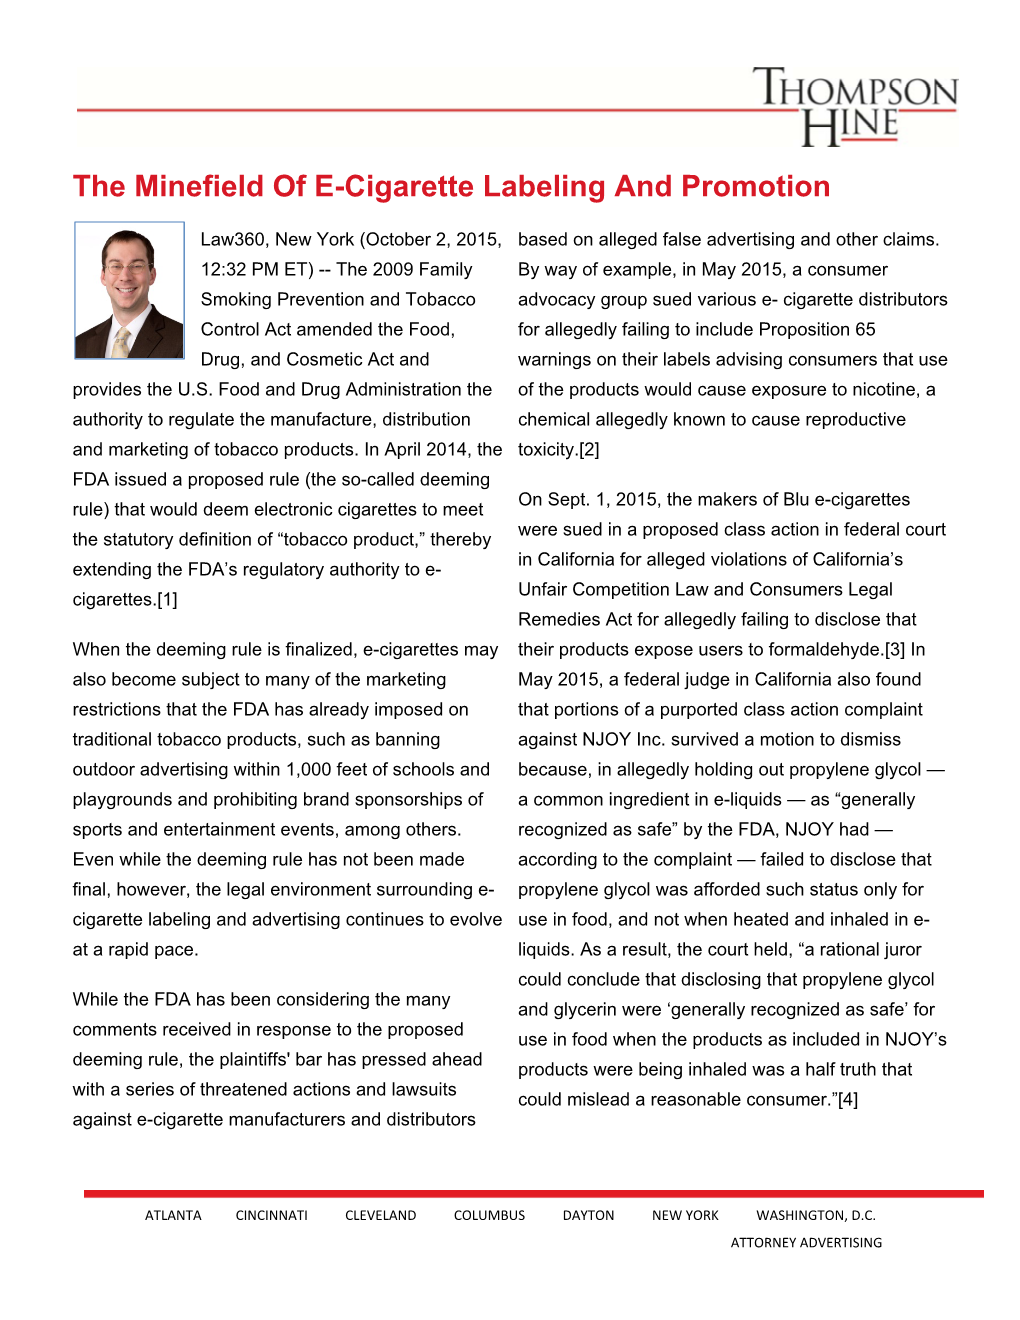 The Minefield of E-Cigarette Labeling and Promotion